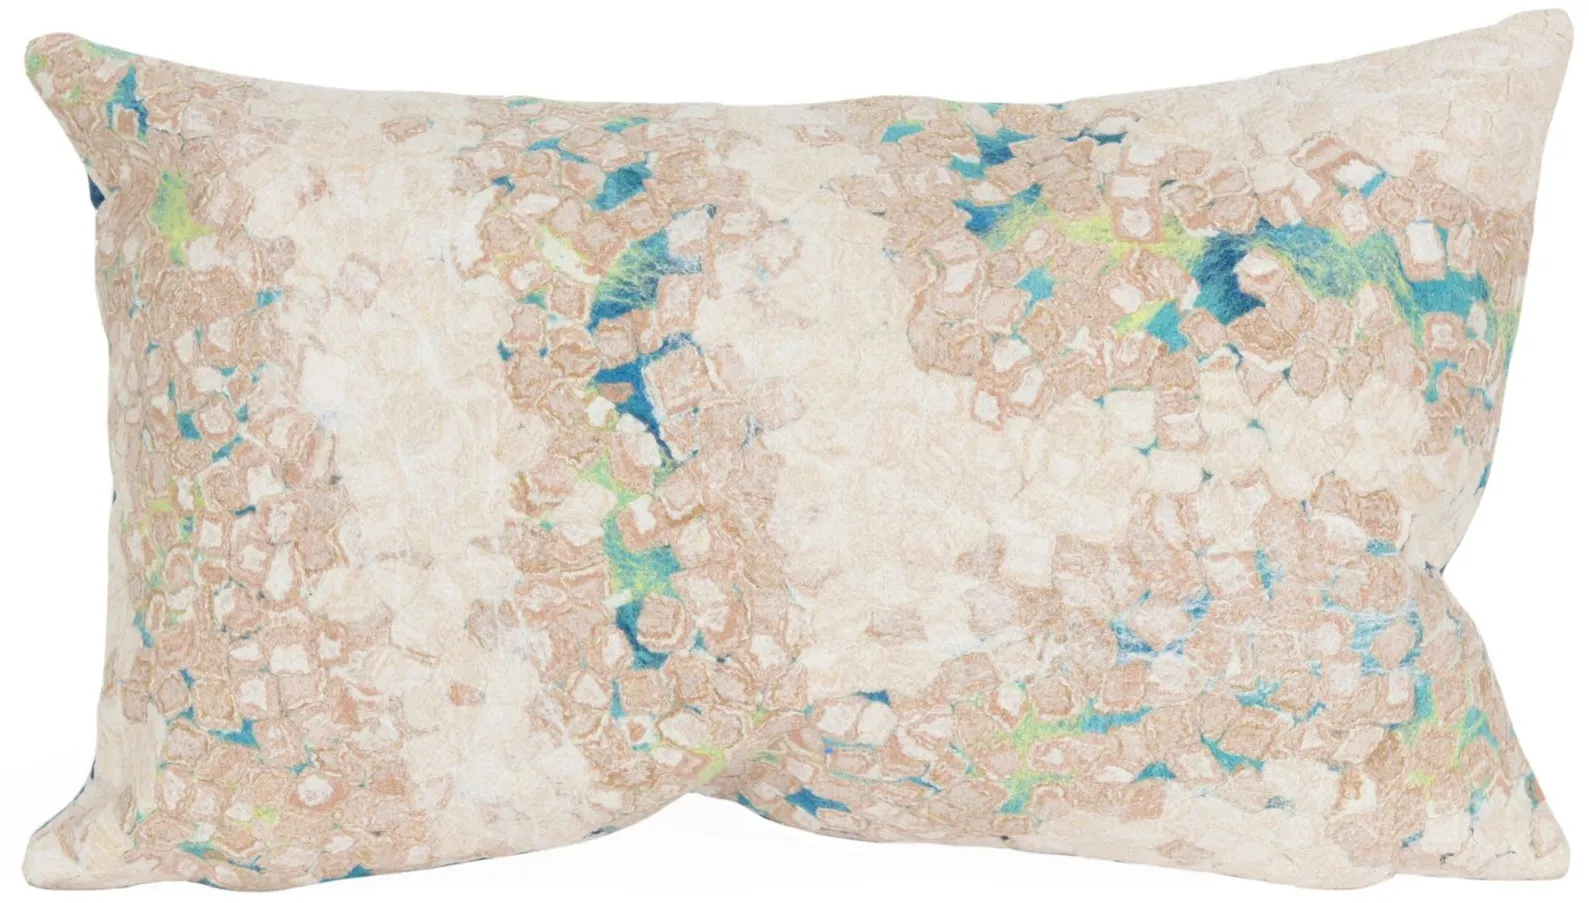 Liora Manne Visions III Elements Pillow in Blue by Trans-Ocean Import Co Inc